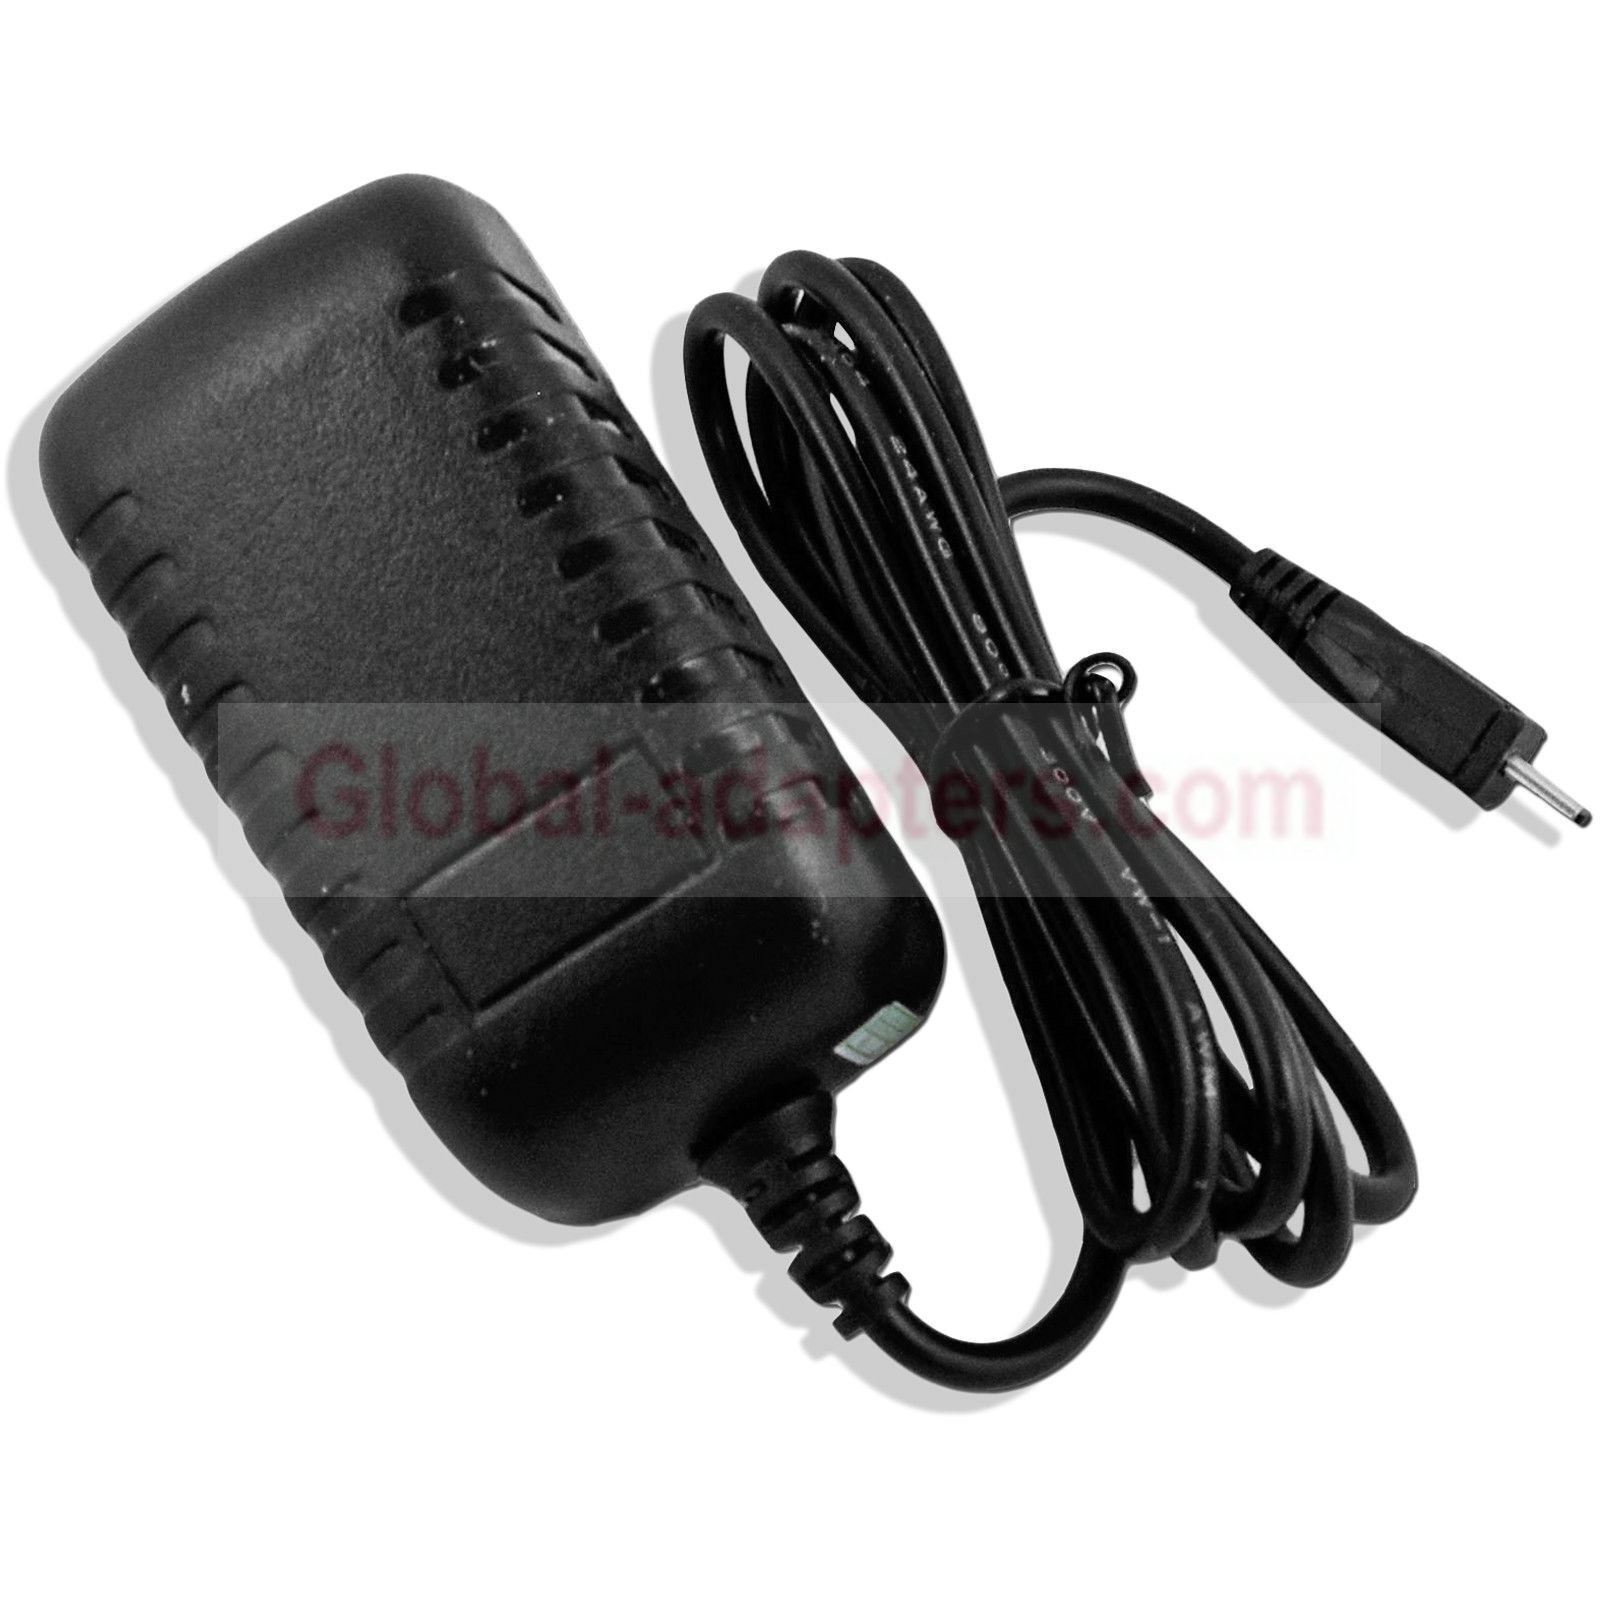 New 5V 2A RCA 8 Apollo RCT6573W23 Tablet Computer Power Supply AC ADAPTER - Click Image to Close